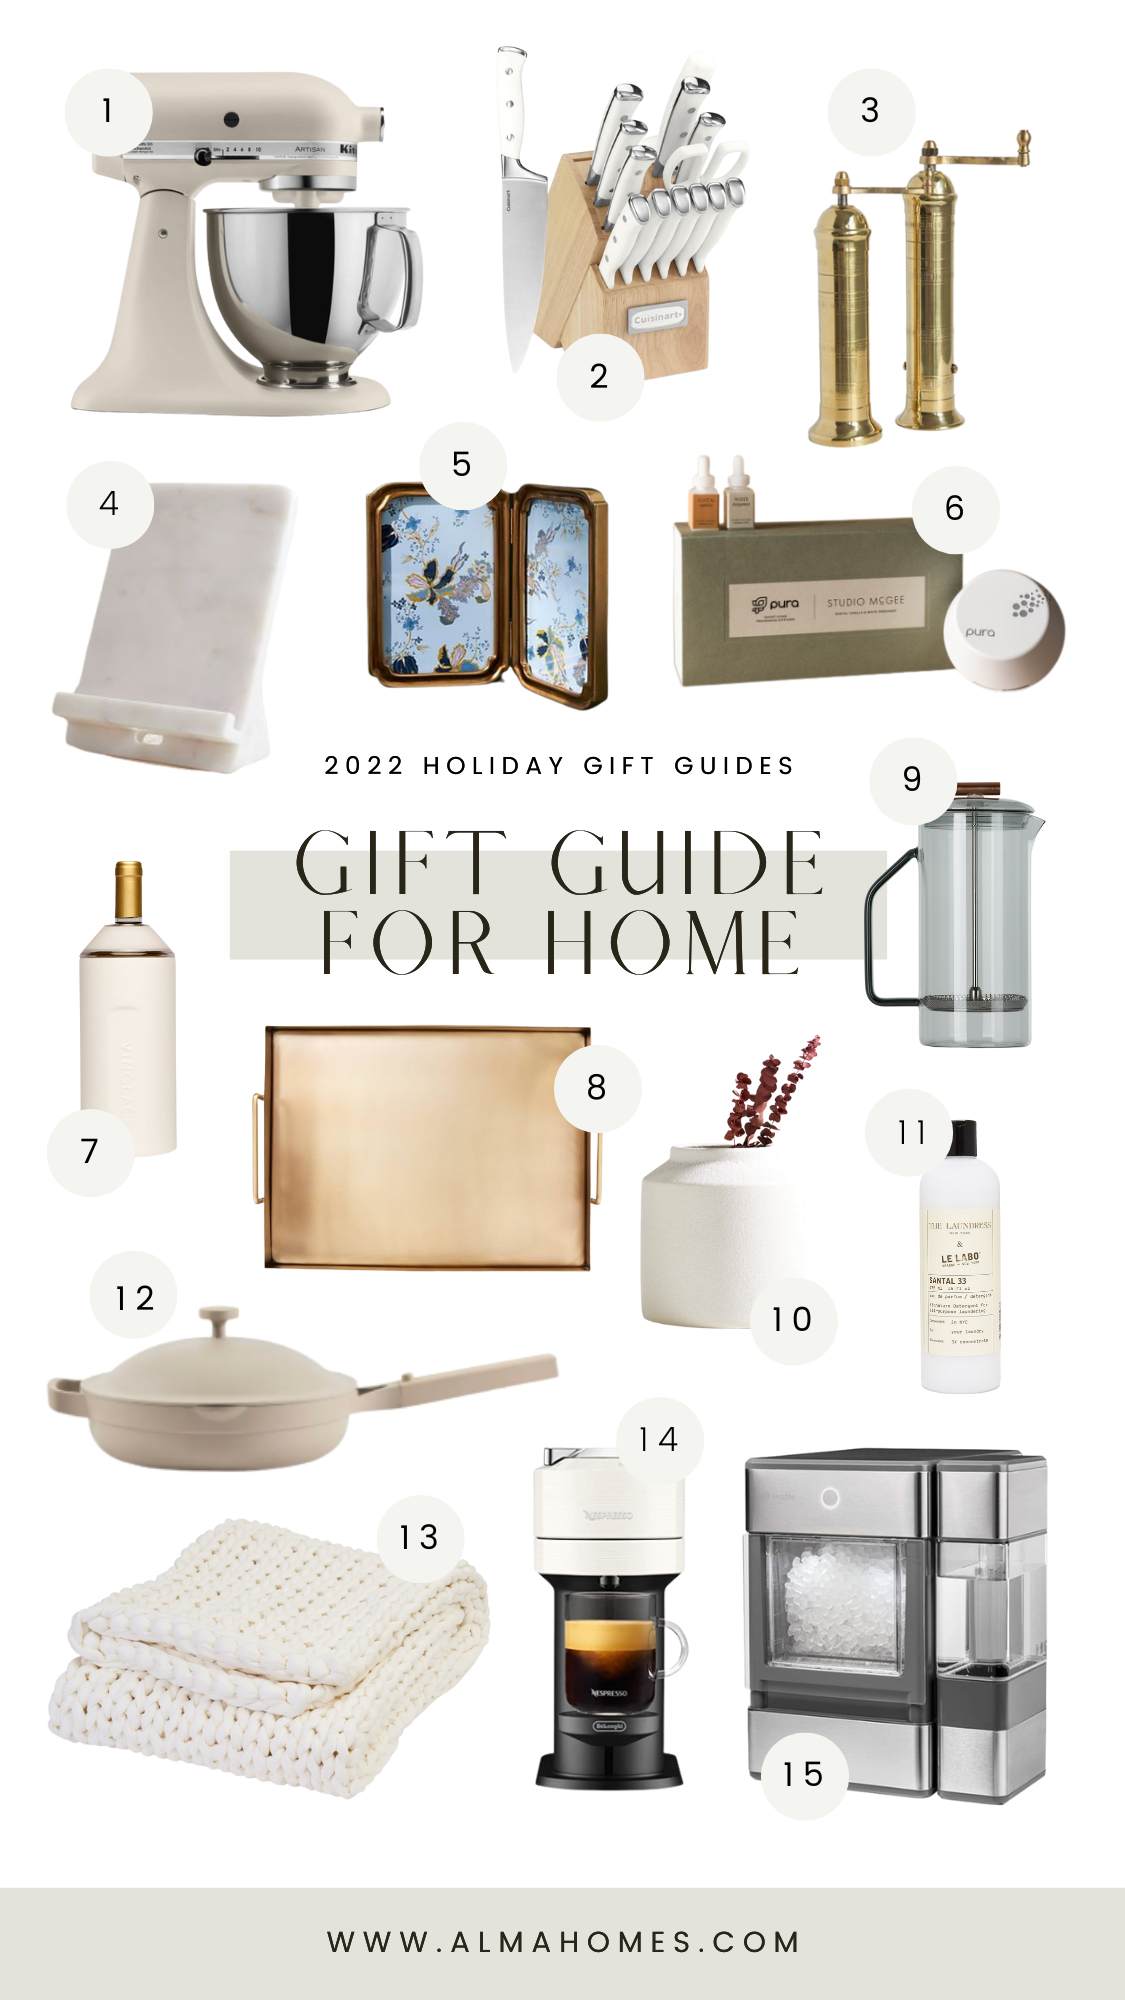 alma-homes-holiday-gift-guide-for-home-2022